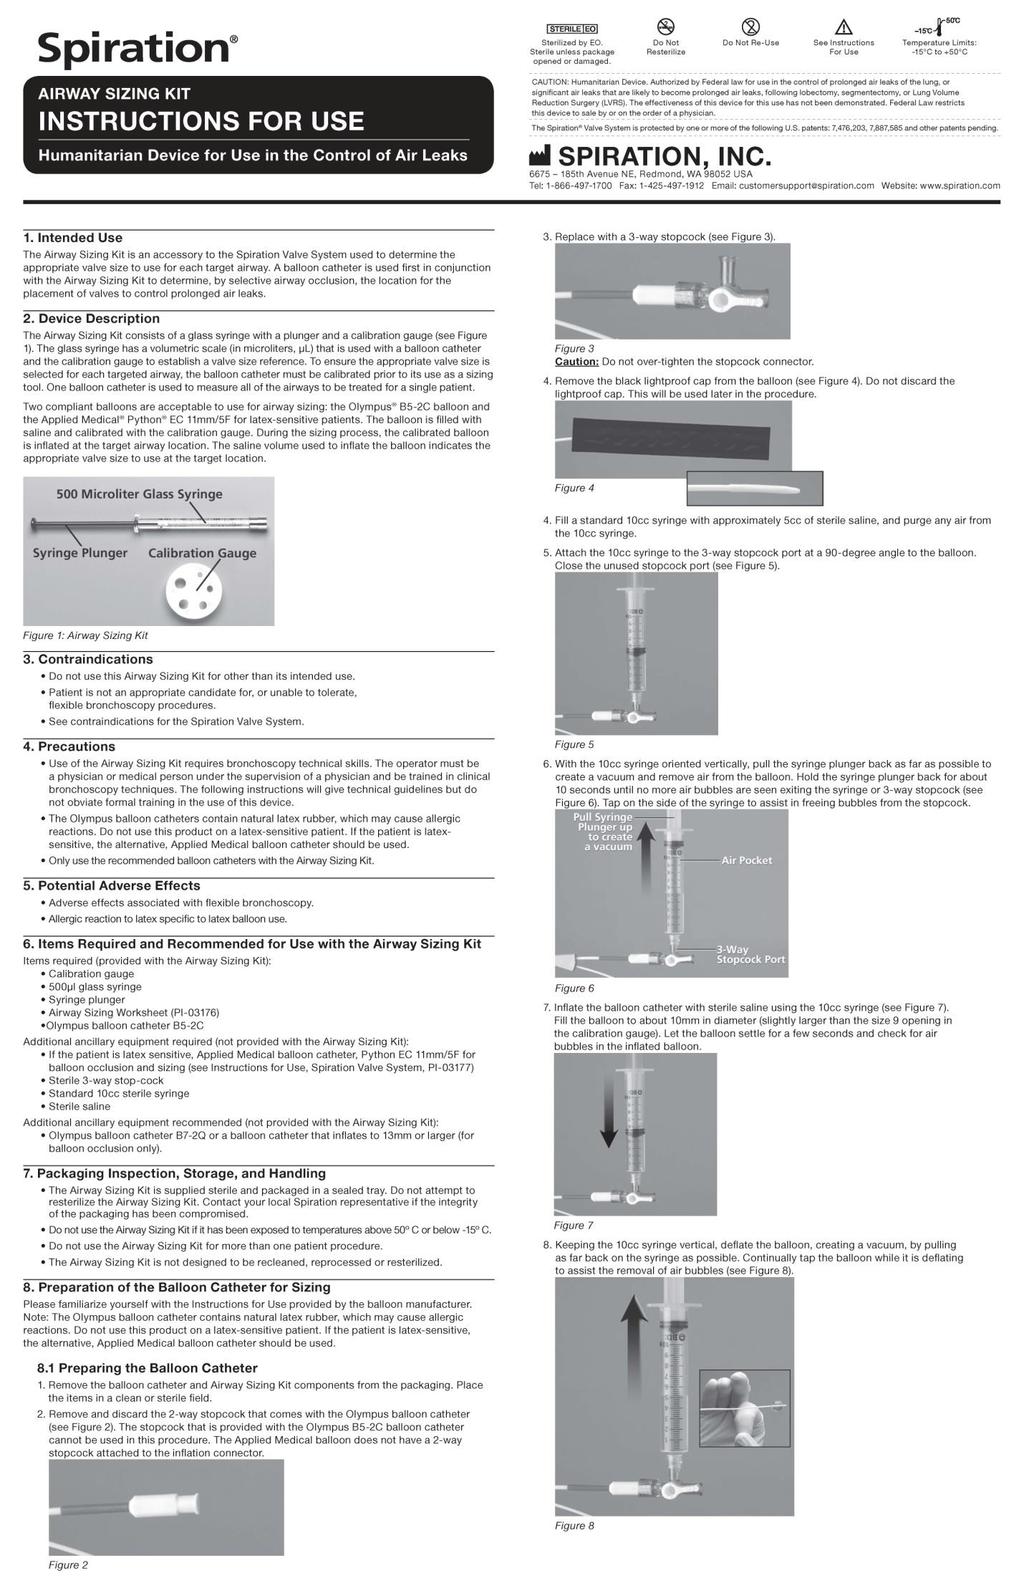 Attachment E: Instructions For Use Airway Sizing Kit Copyright 2015